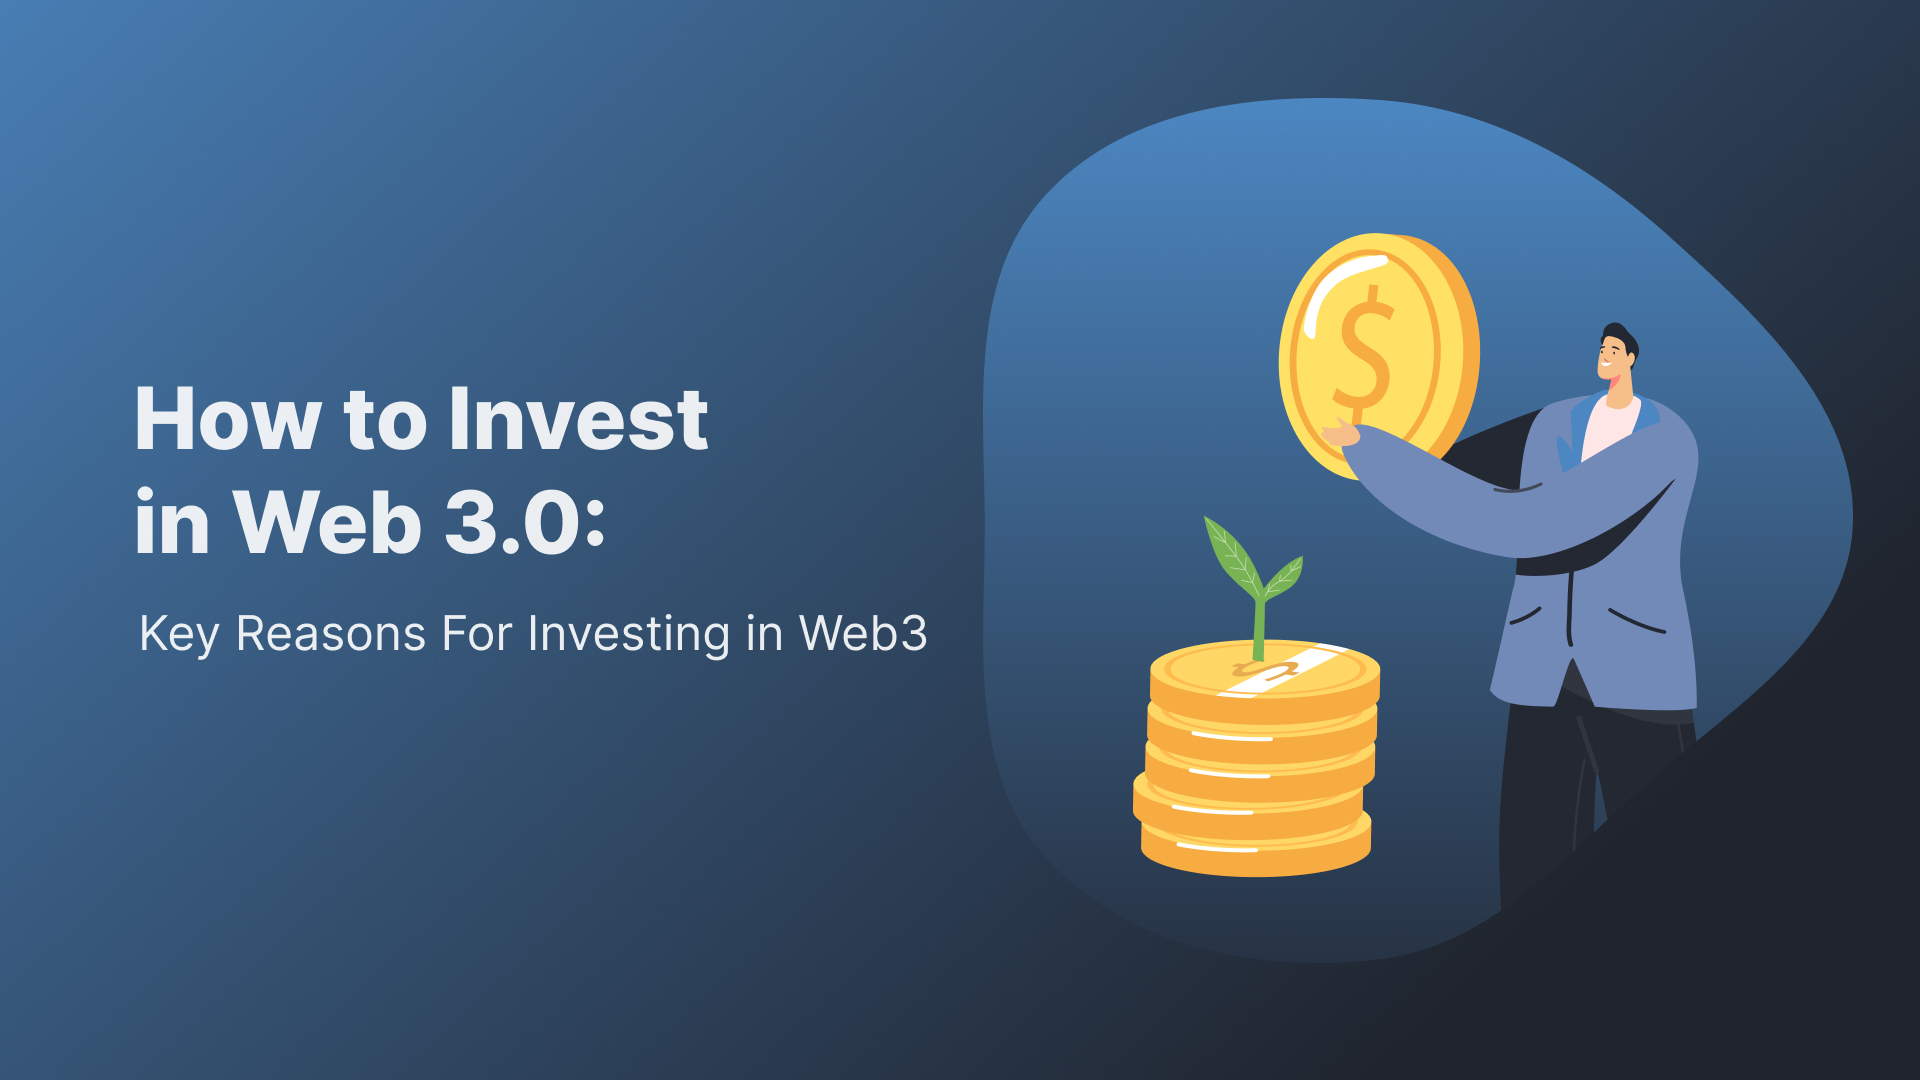 How to Invest in Web 3.0: Key Reasons For Investing in Web3